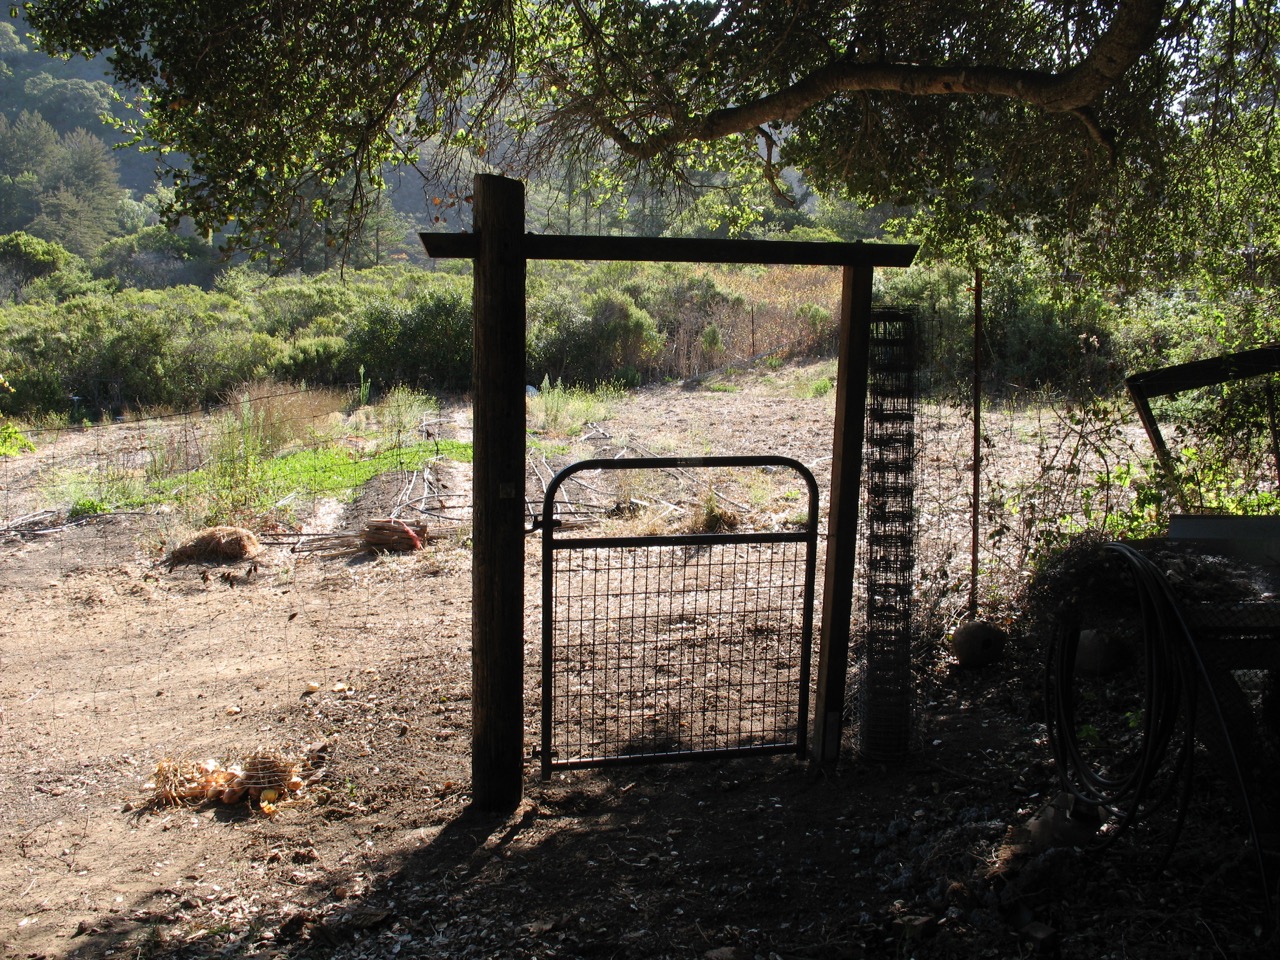 Another farm gate